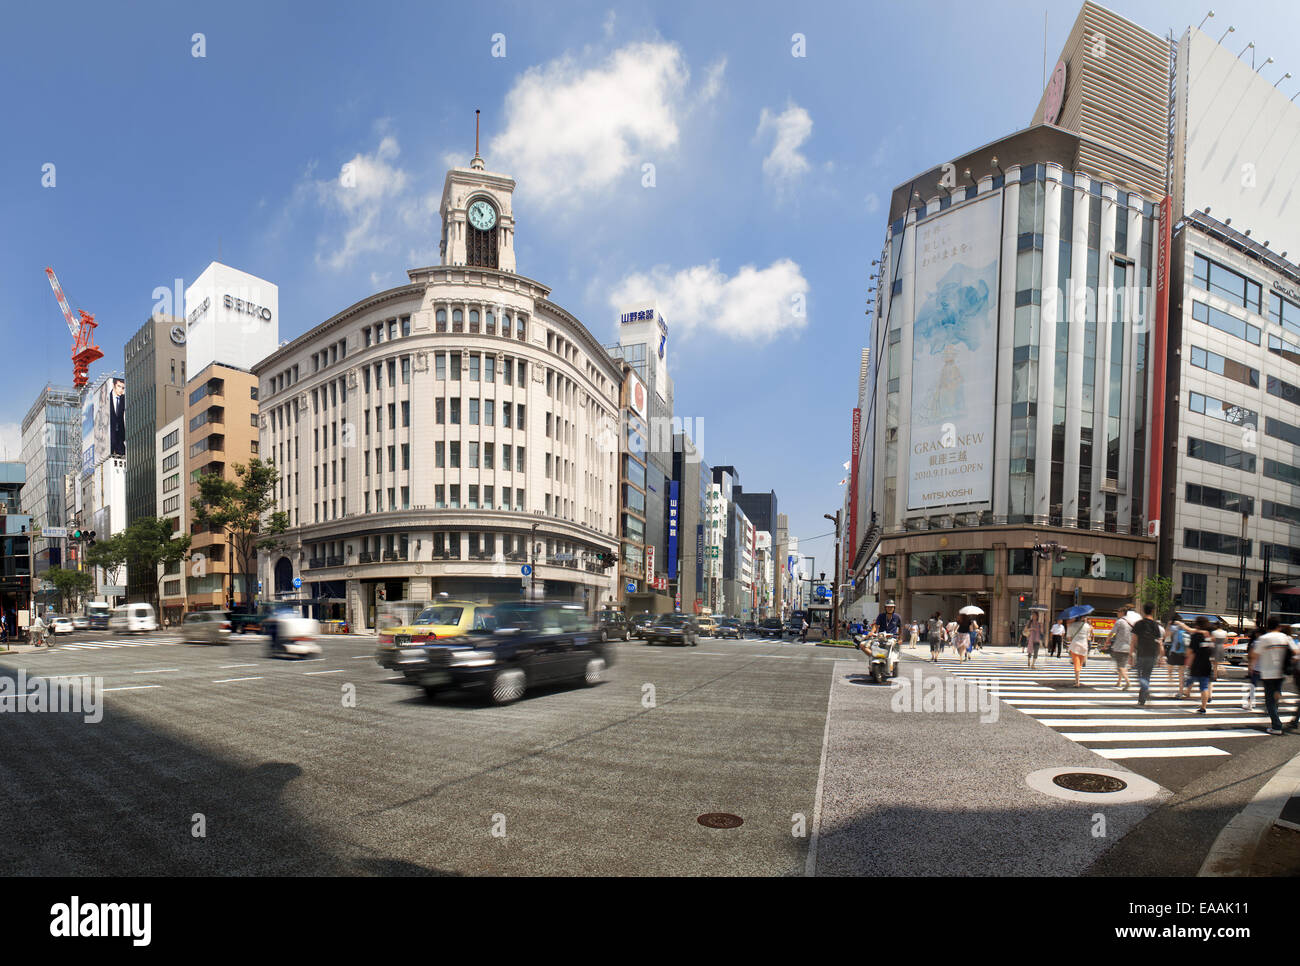 View of Shibuya Crossing, one of the busiest crosswalks in the world. Tokyo, Japan Stock Photo